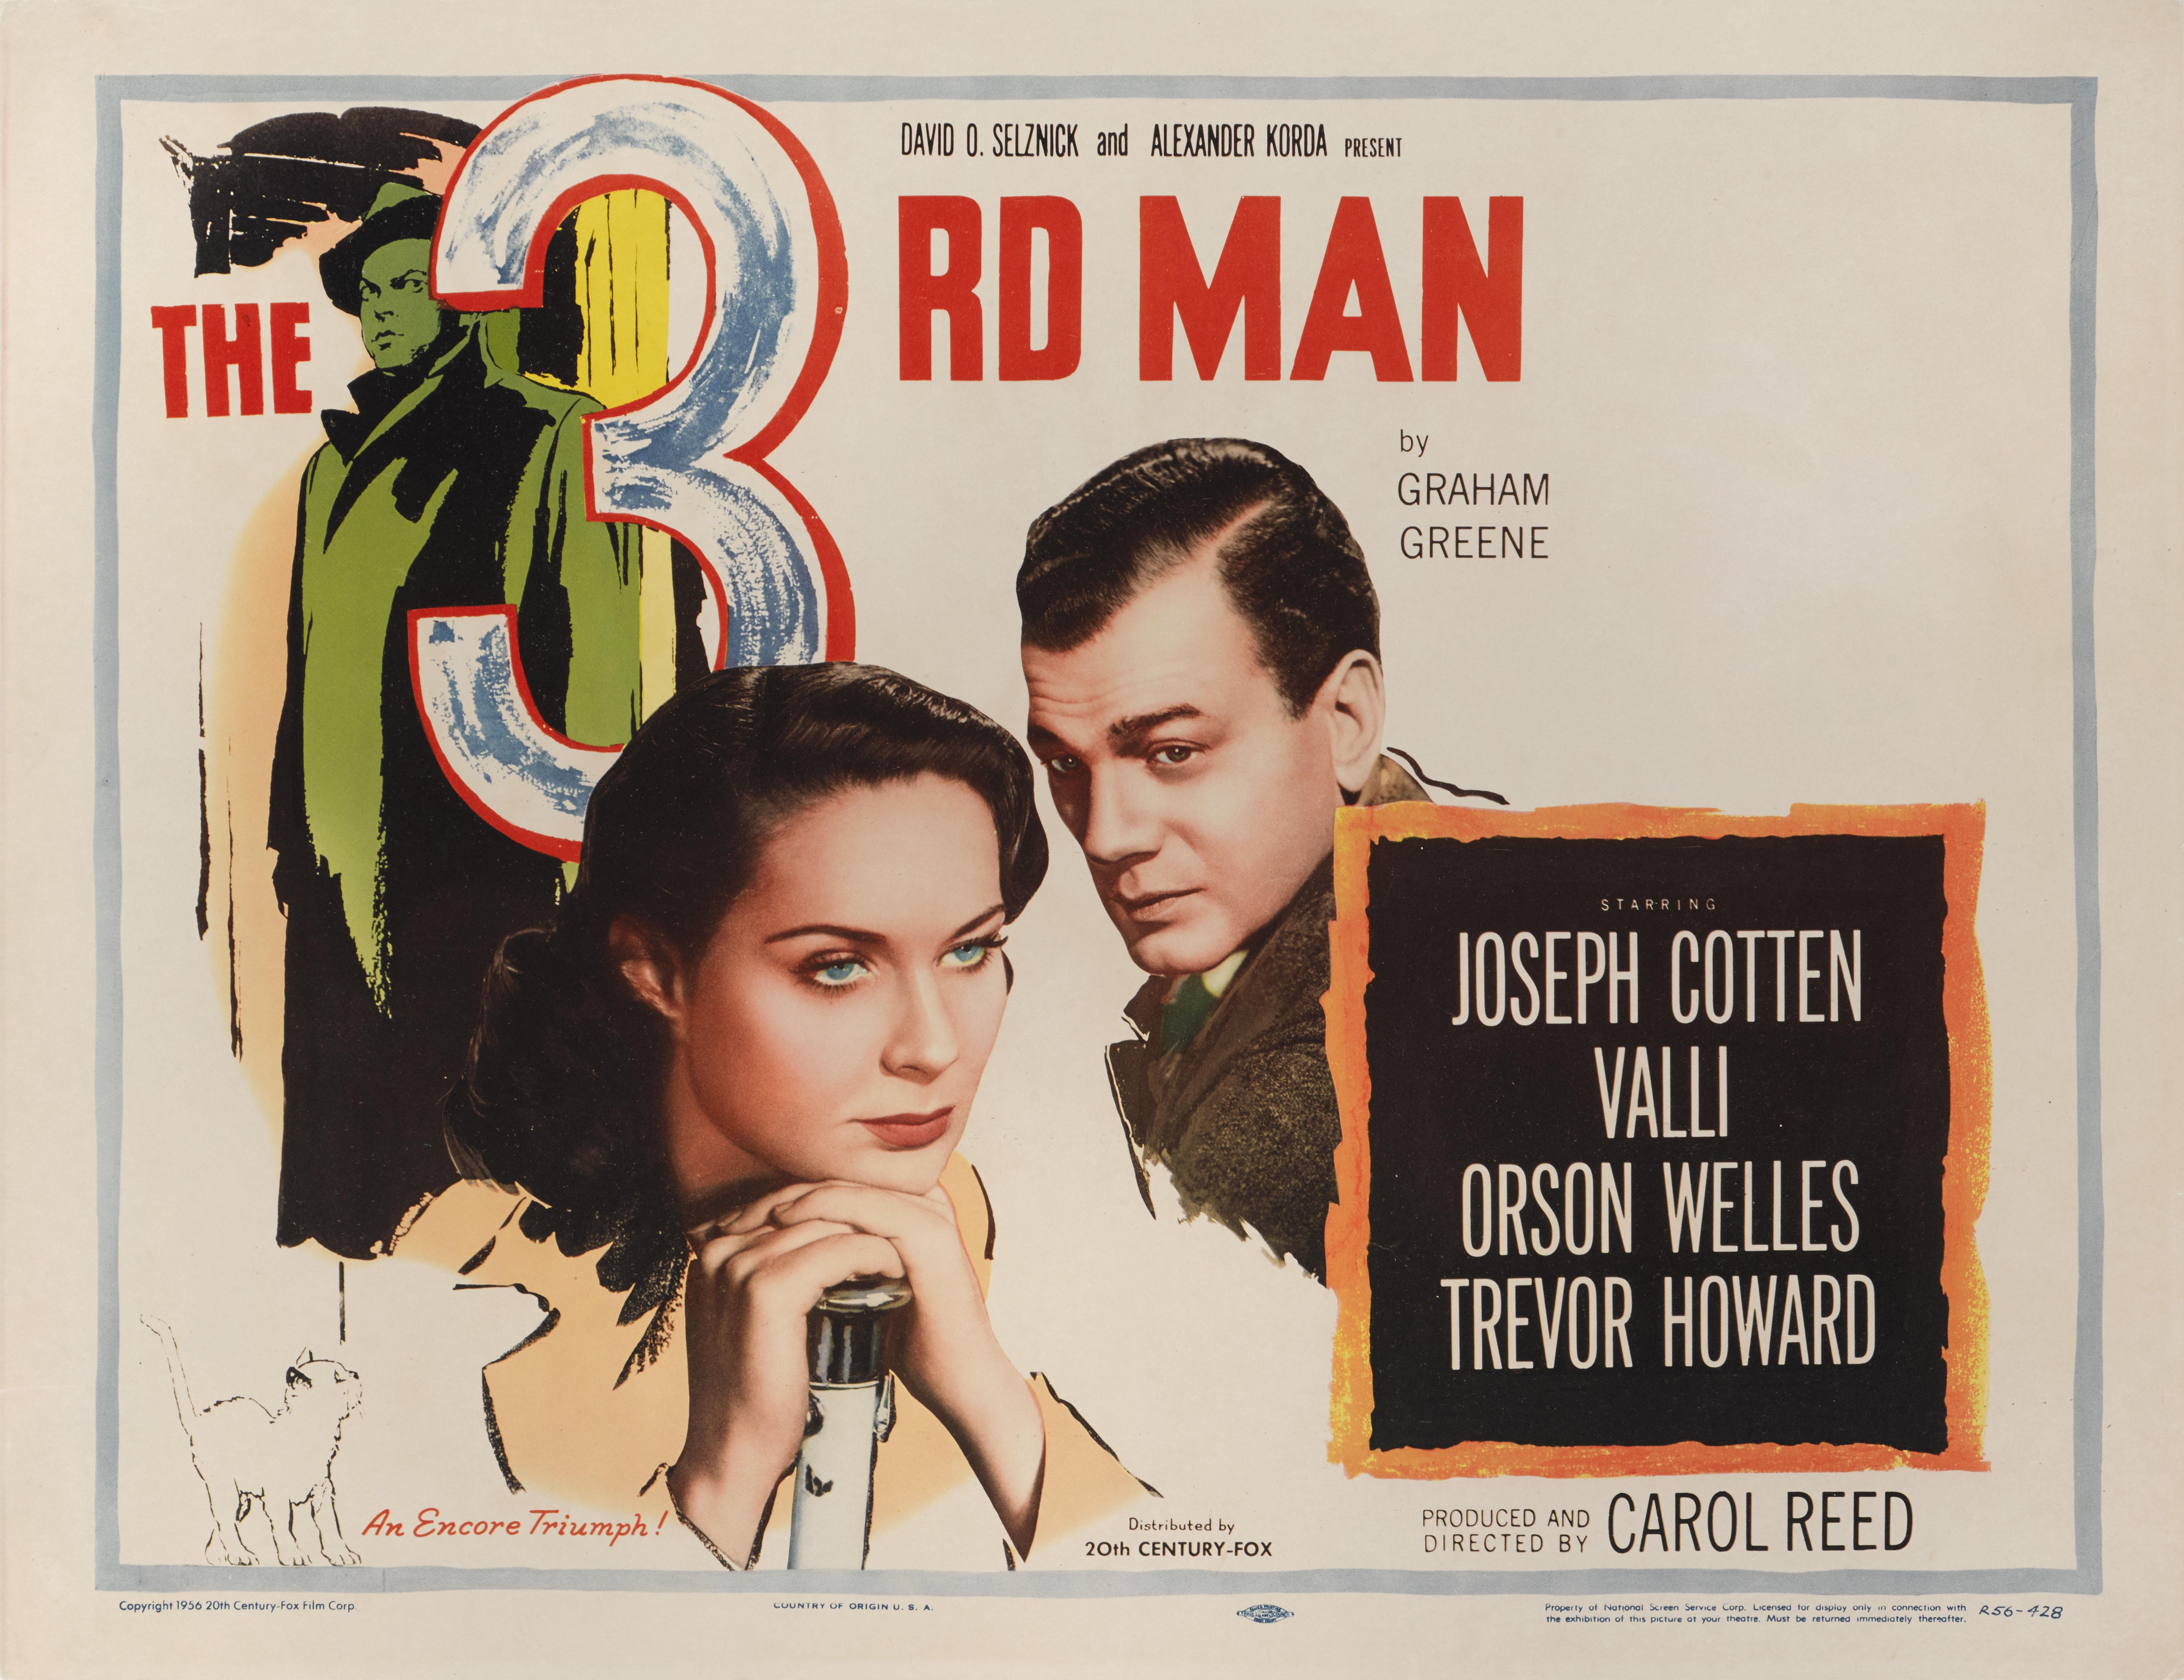 Original US film poster for The Third Man.
This powerful film noir was directed by Carol Reed and written by Graham Greene. The film stars Orson Welles, Joseph Cotten, Valli and Trevor Howard. Robert Krasker's brilliant expressionist